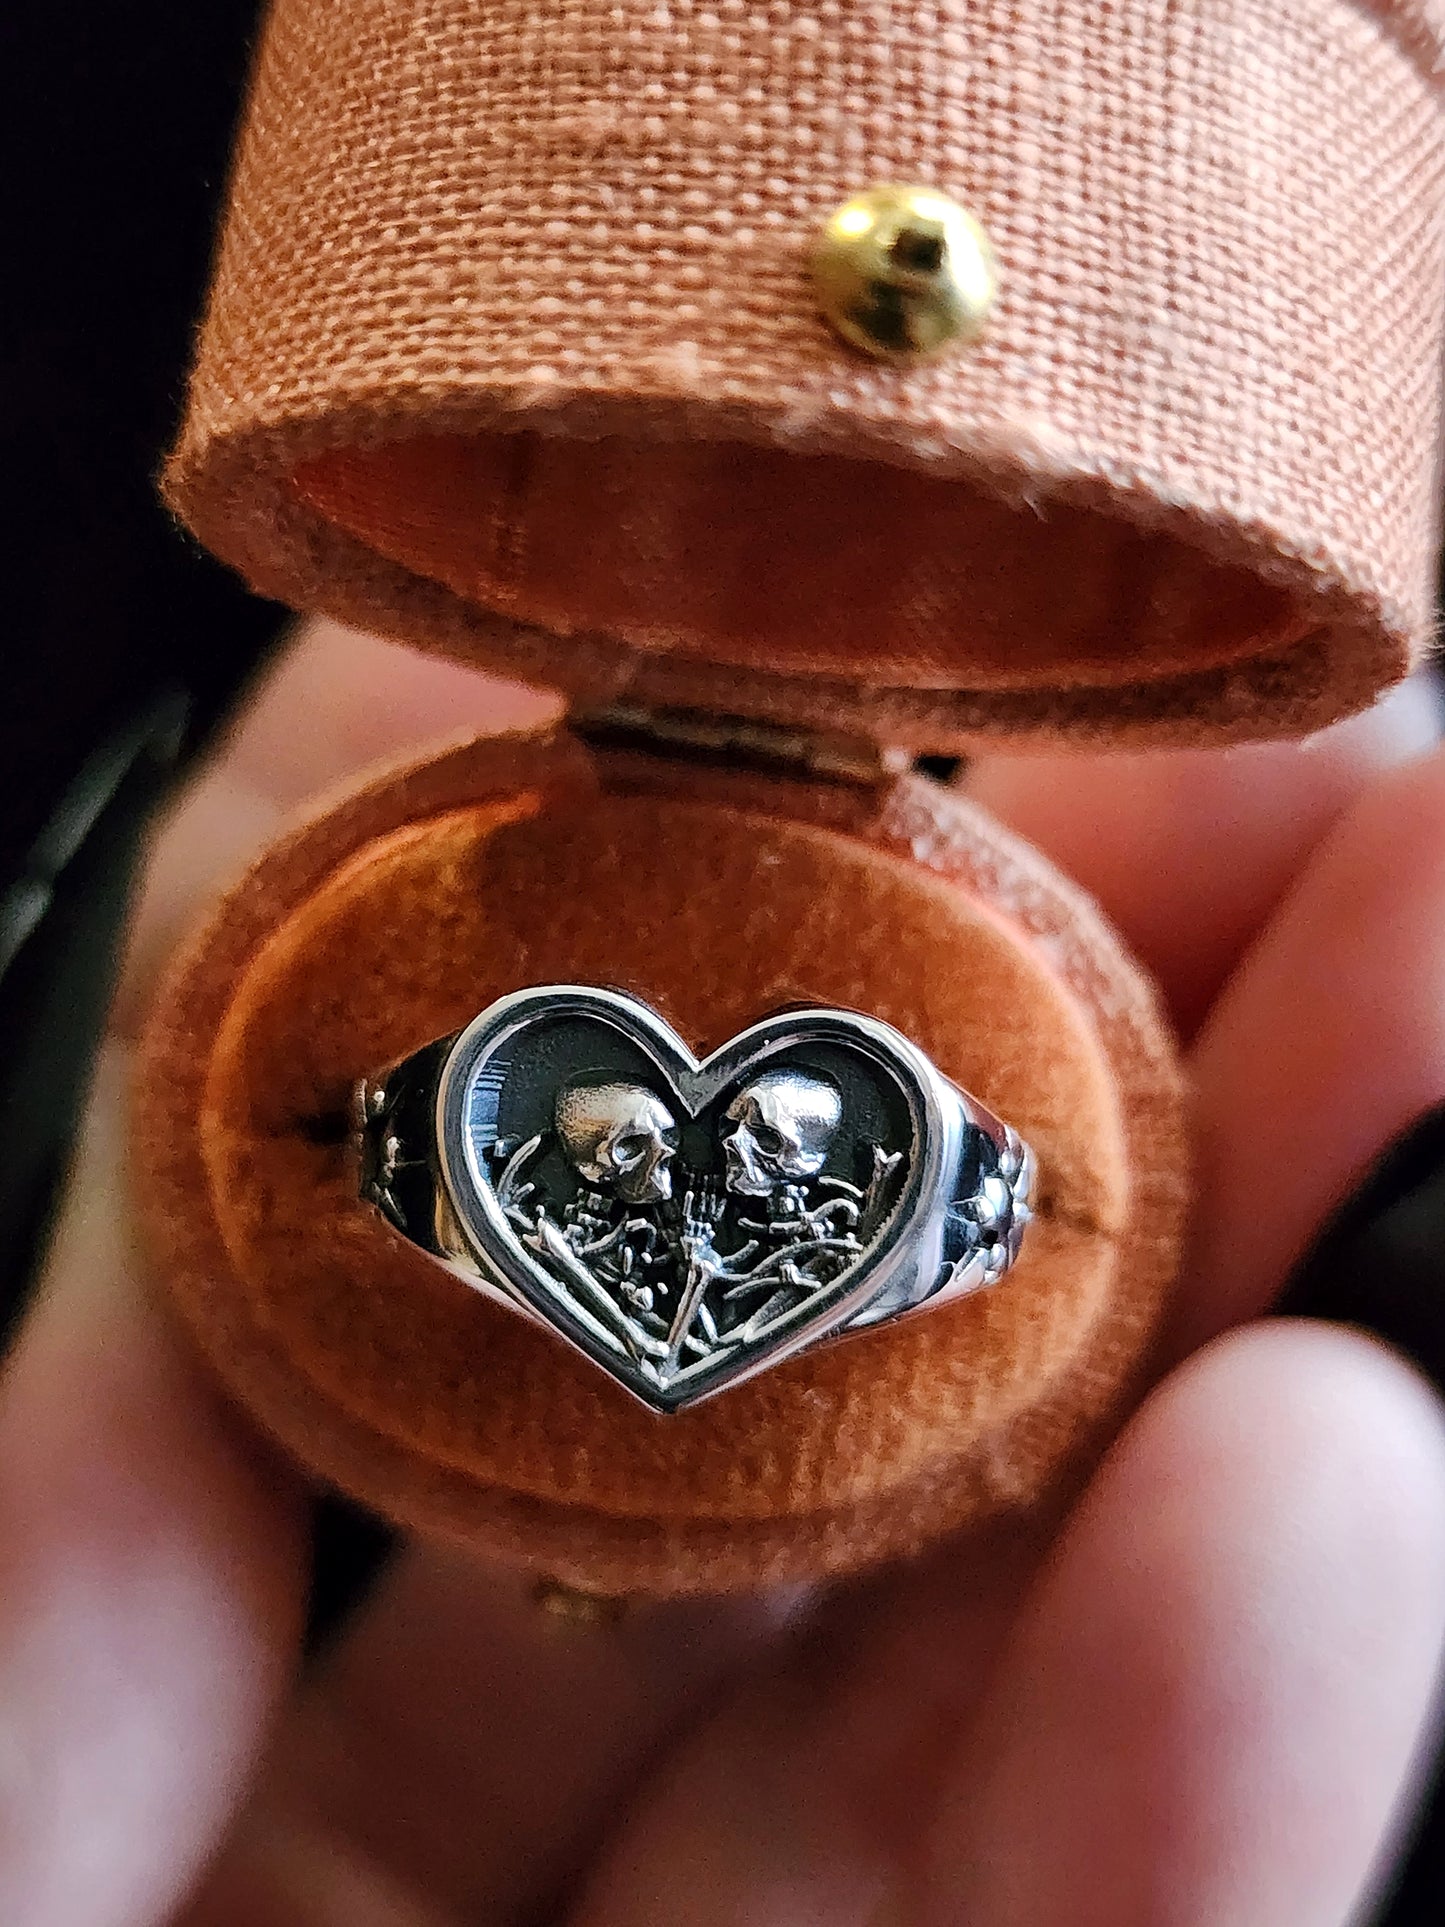 The Lovers Signet Ring Heart Shaped Skeleton Embrace - Romantic Promise Ring Sterling Silver with Black Diamonds Memento Mori